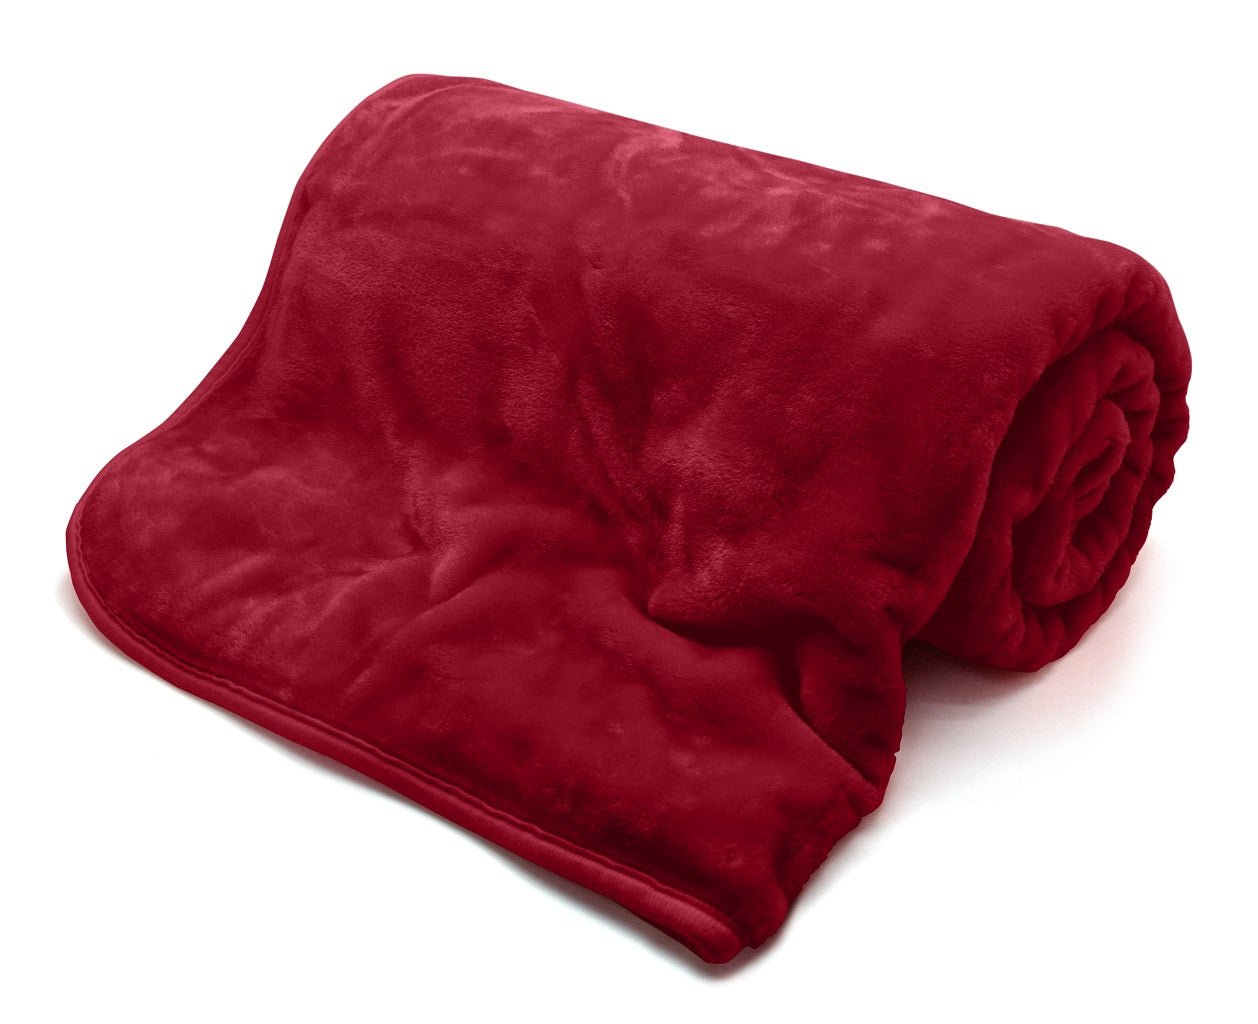 Mink Throws Blanket For Couch - TheComfortshop.co.ukThrows0721718973874thecomfortshopTheComfortshop.co.ukmink-throws-blanket-for-couchRedSingleMink Throws Blanket For Couch - TheComfortshop.co.uk